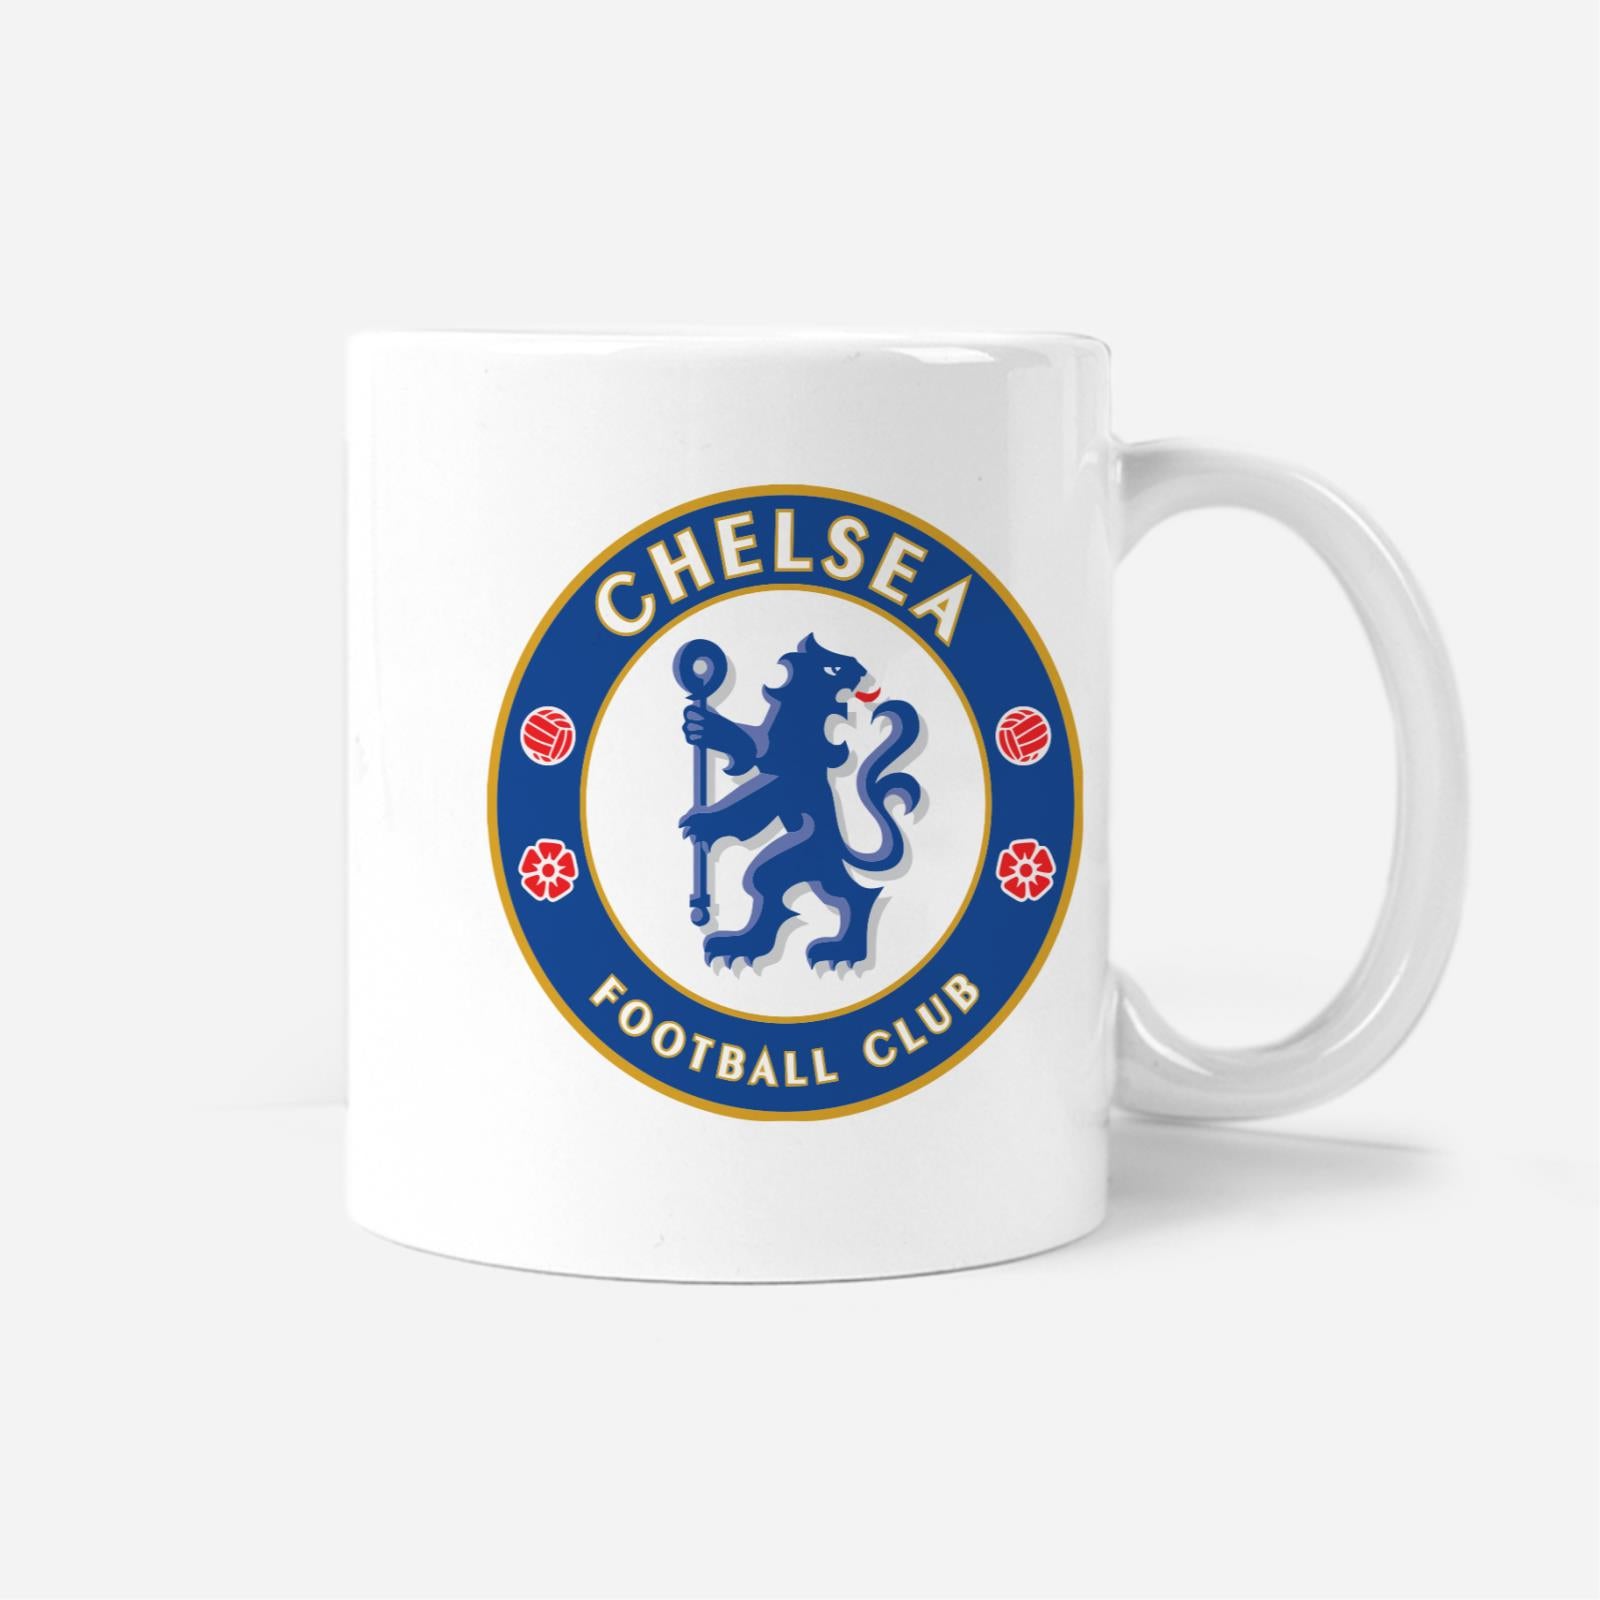 Chelsea Football Fan Mug Personalizable with Name and Number